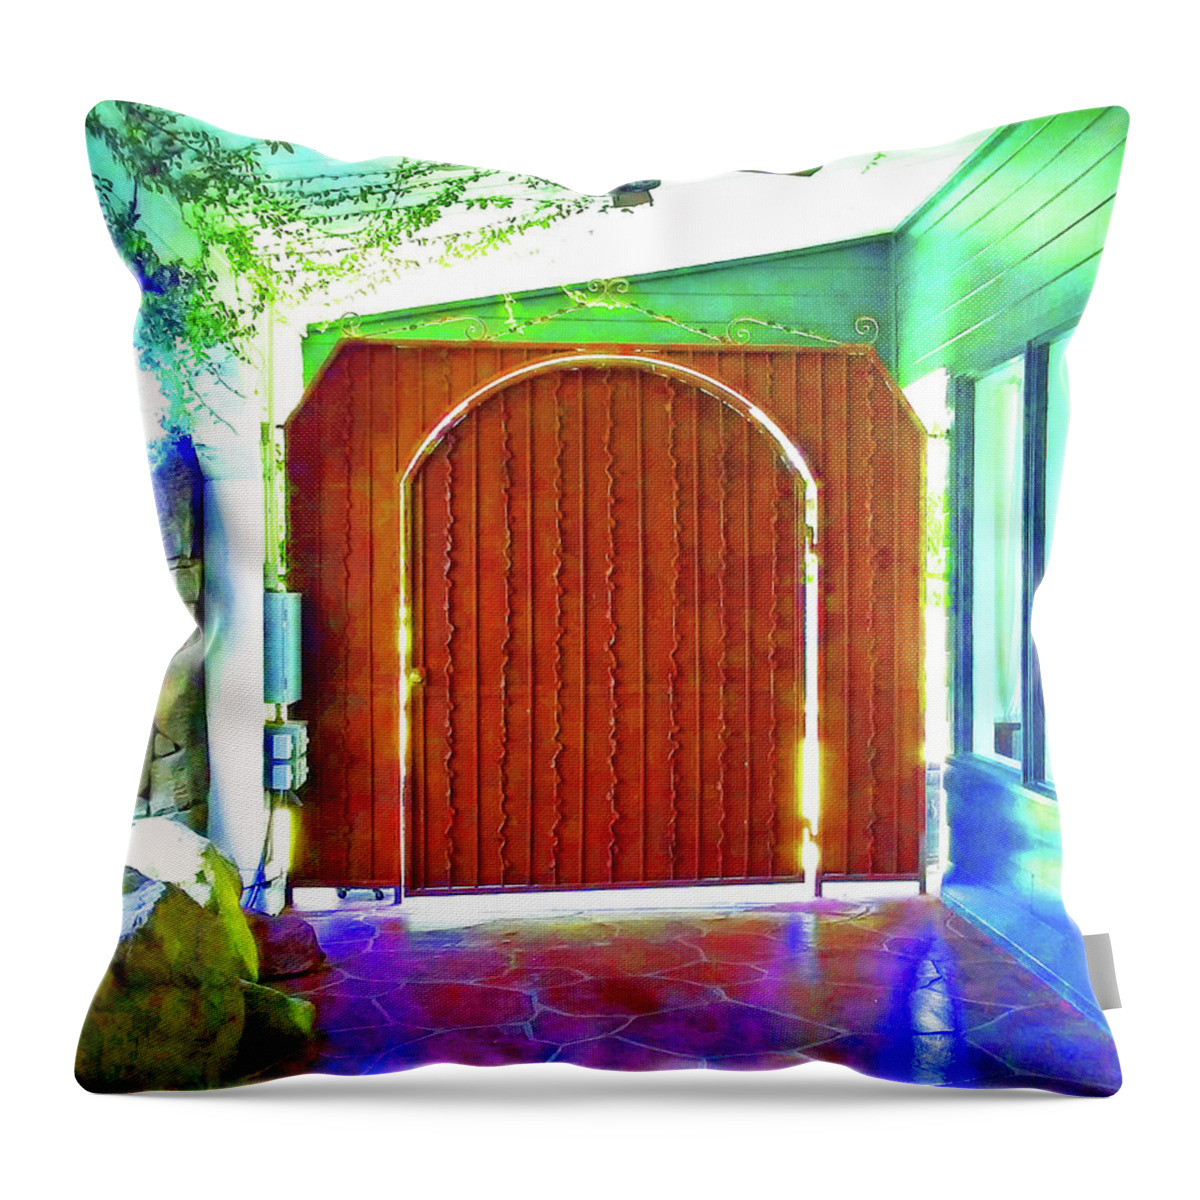 Spiritual Throw Pillow featuring the photograph Doorway To The Light by Andrew Lawrence